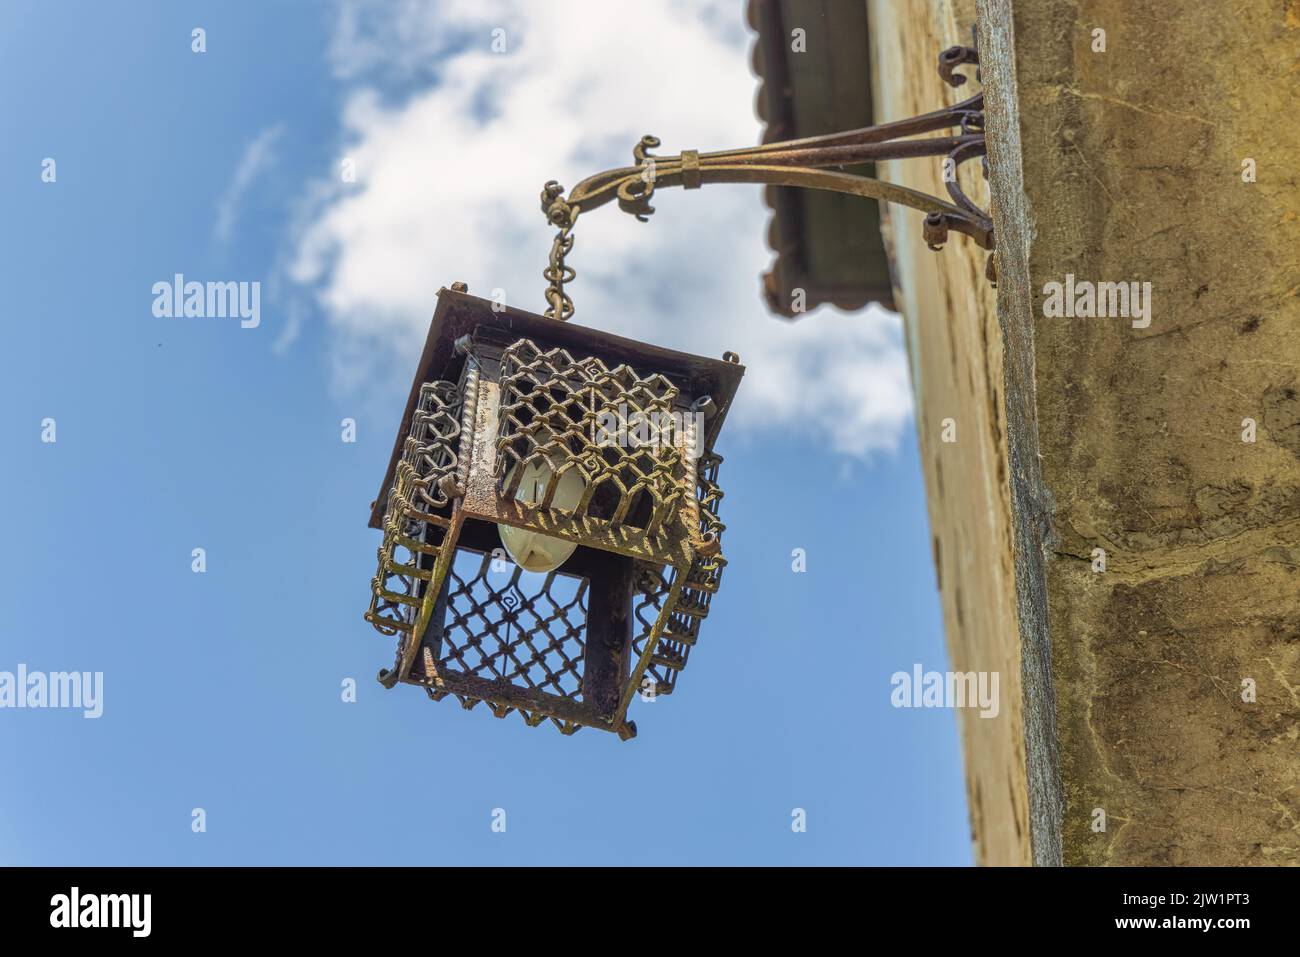 Old medieval replica lamp on the entrance of the Old Castle and town Ozalj Stock Photo